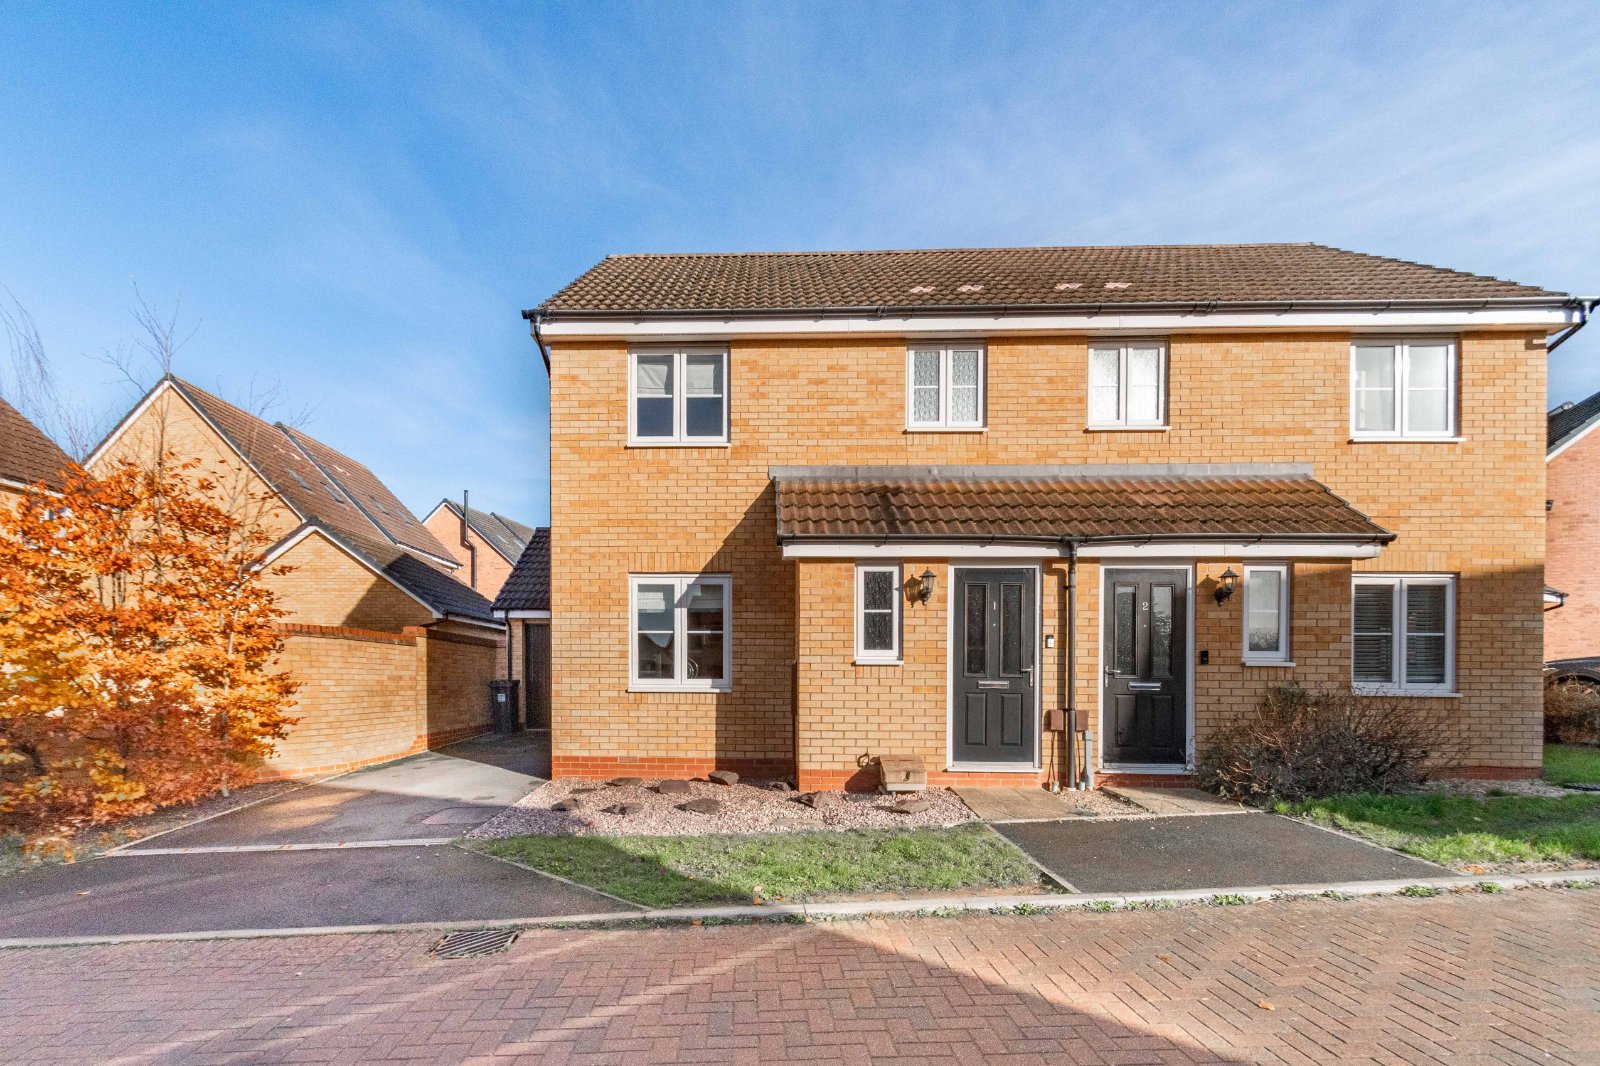 3 bed house for sale in Gretton Close, Brockhill 14